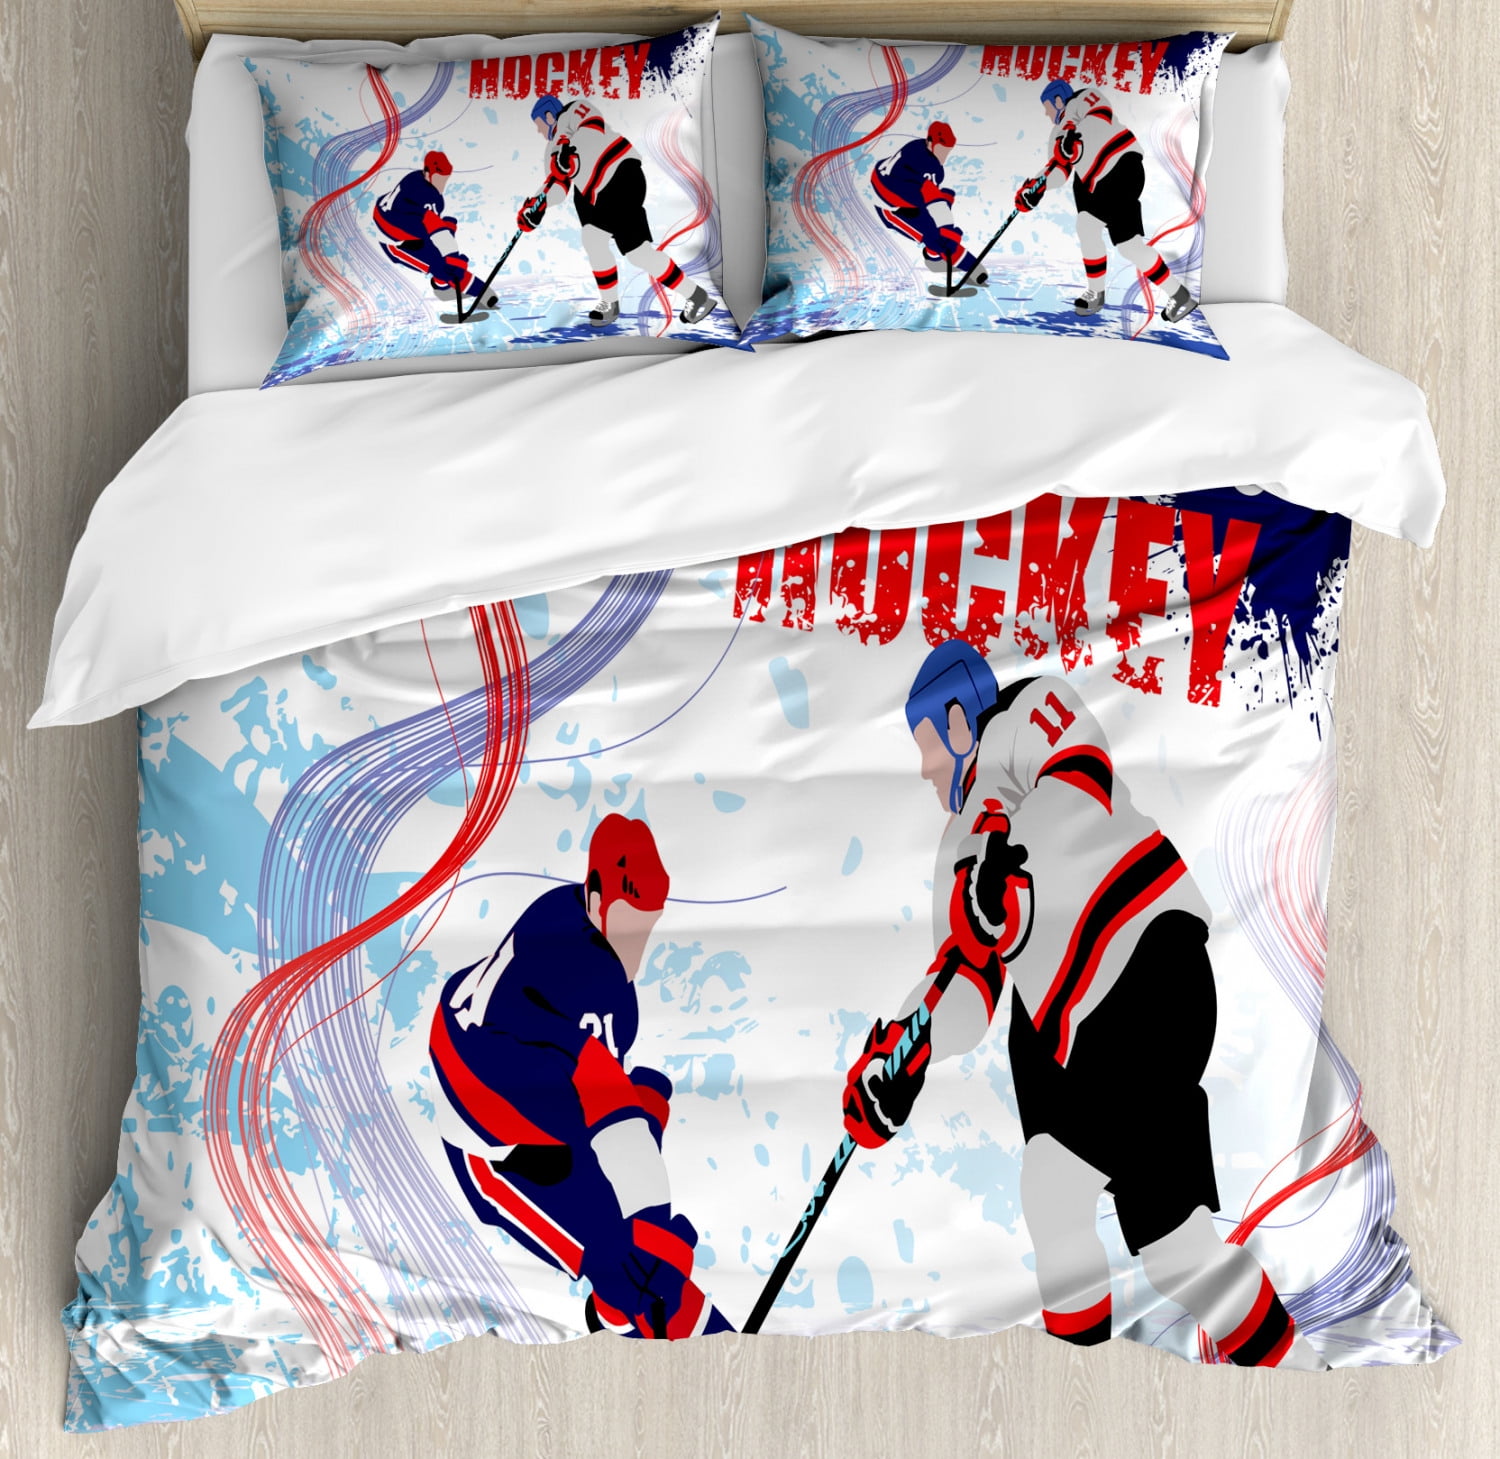 Hockey Duvet Cover Set Two Ice Hockey Players In Cartoon Style On